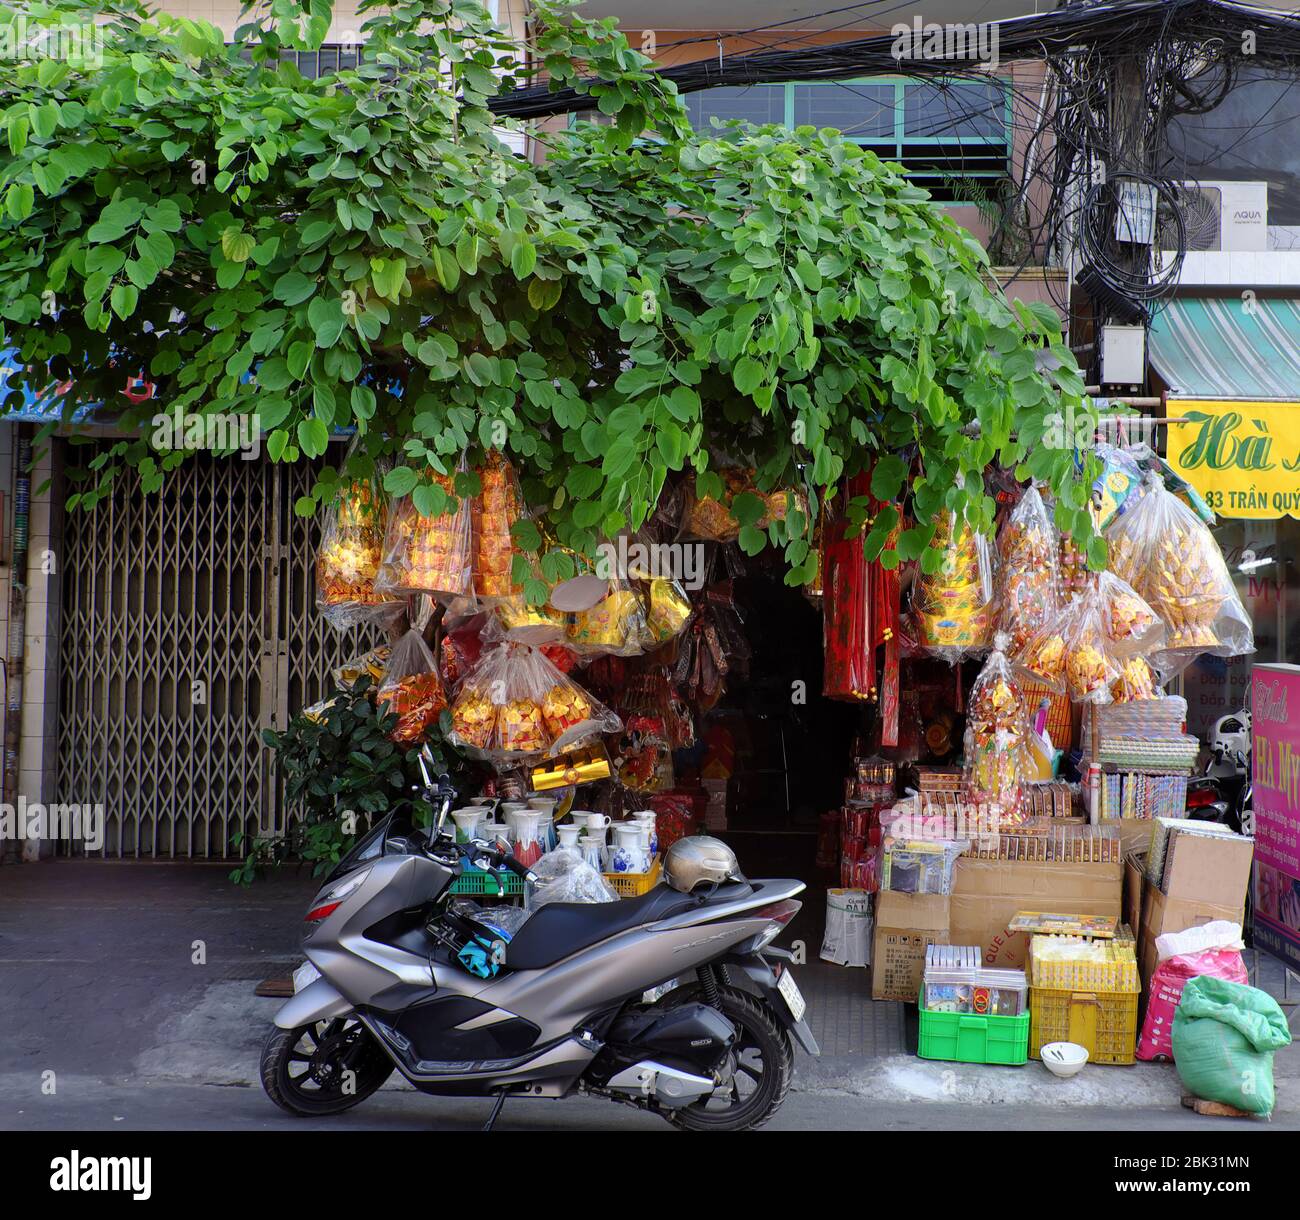 Vietnamese buy votive paper as offerings to worship, traditional cultural of Vietnamese lifestyle, shop under tree with branch of tree on roof on day Stock Photo